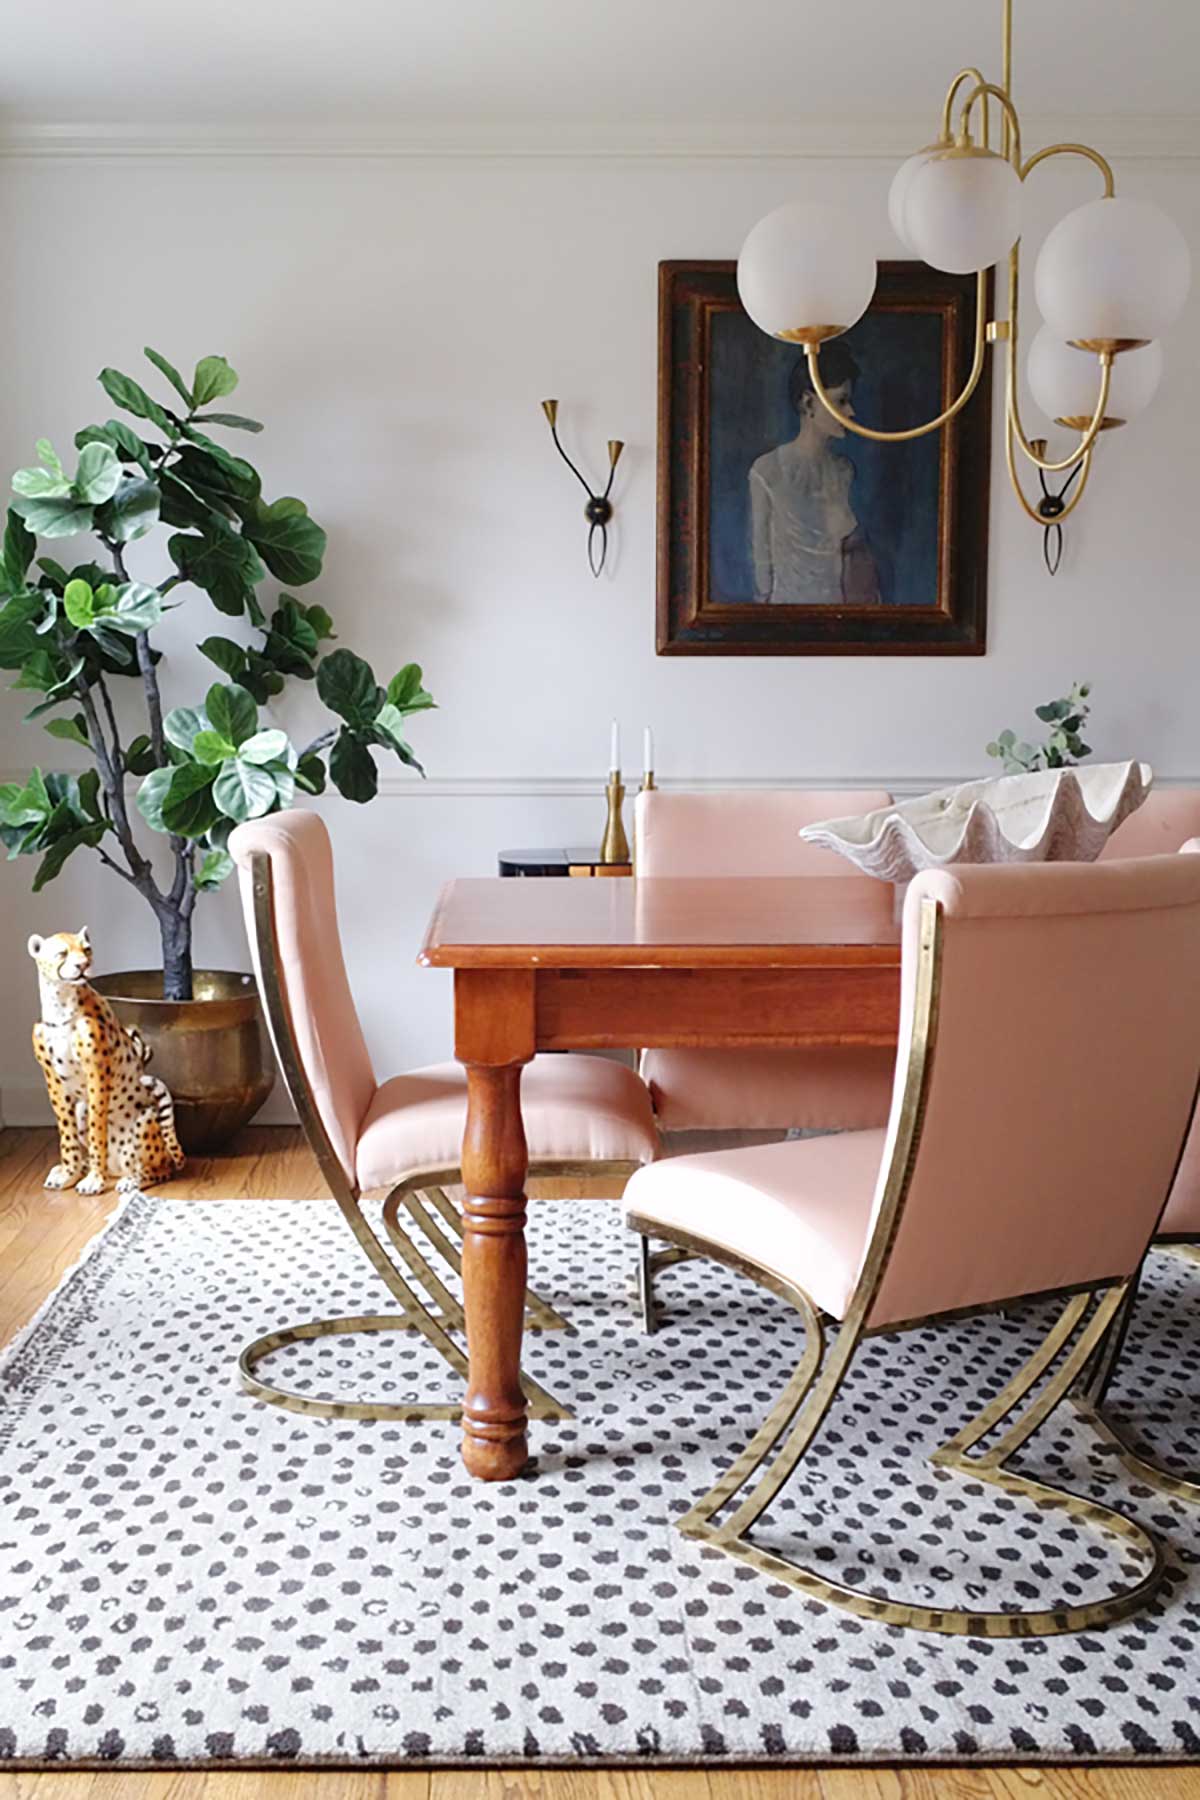 How To Decorate With Artificial Plants - faux fiddle leaf fig tree in eclectic modern dining room